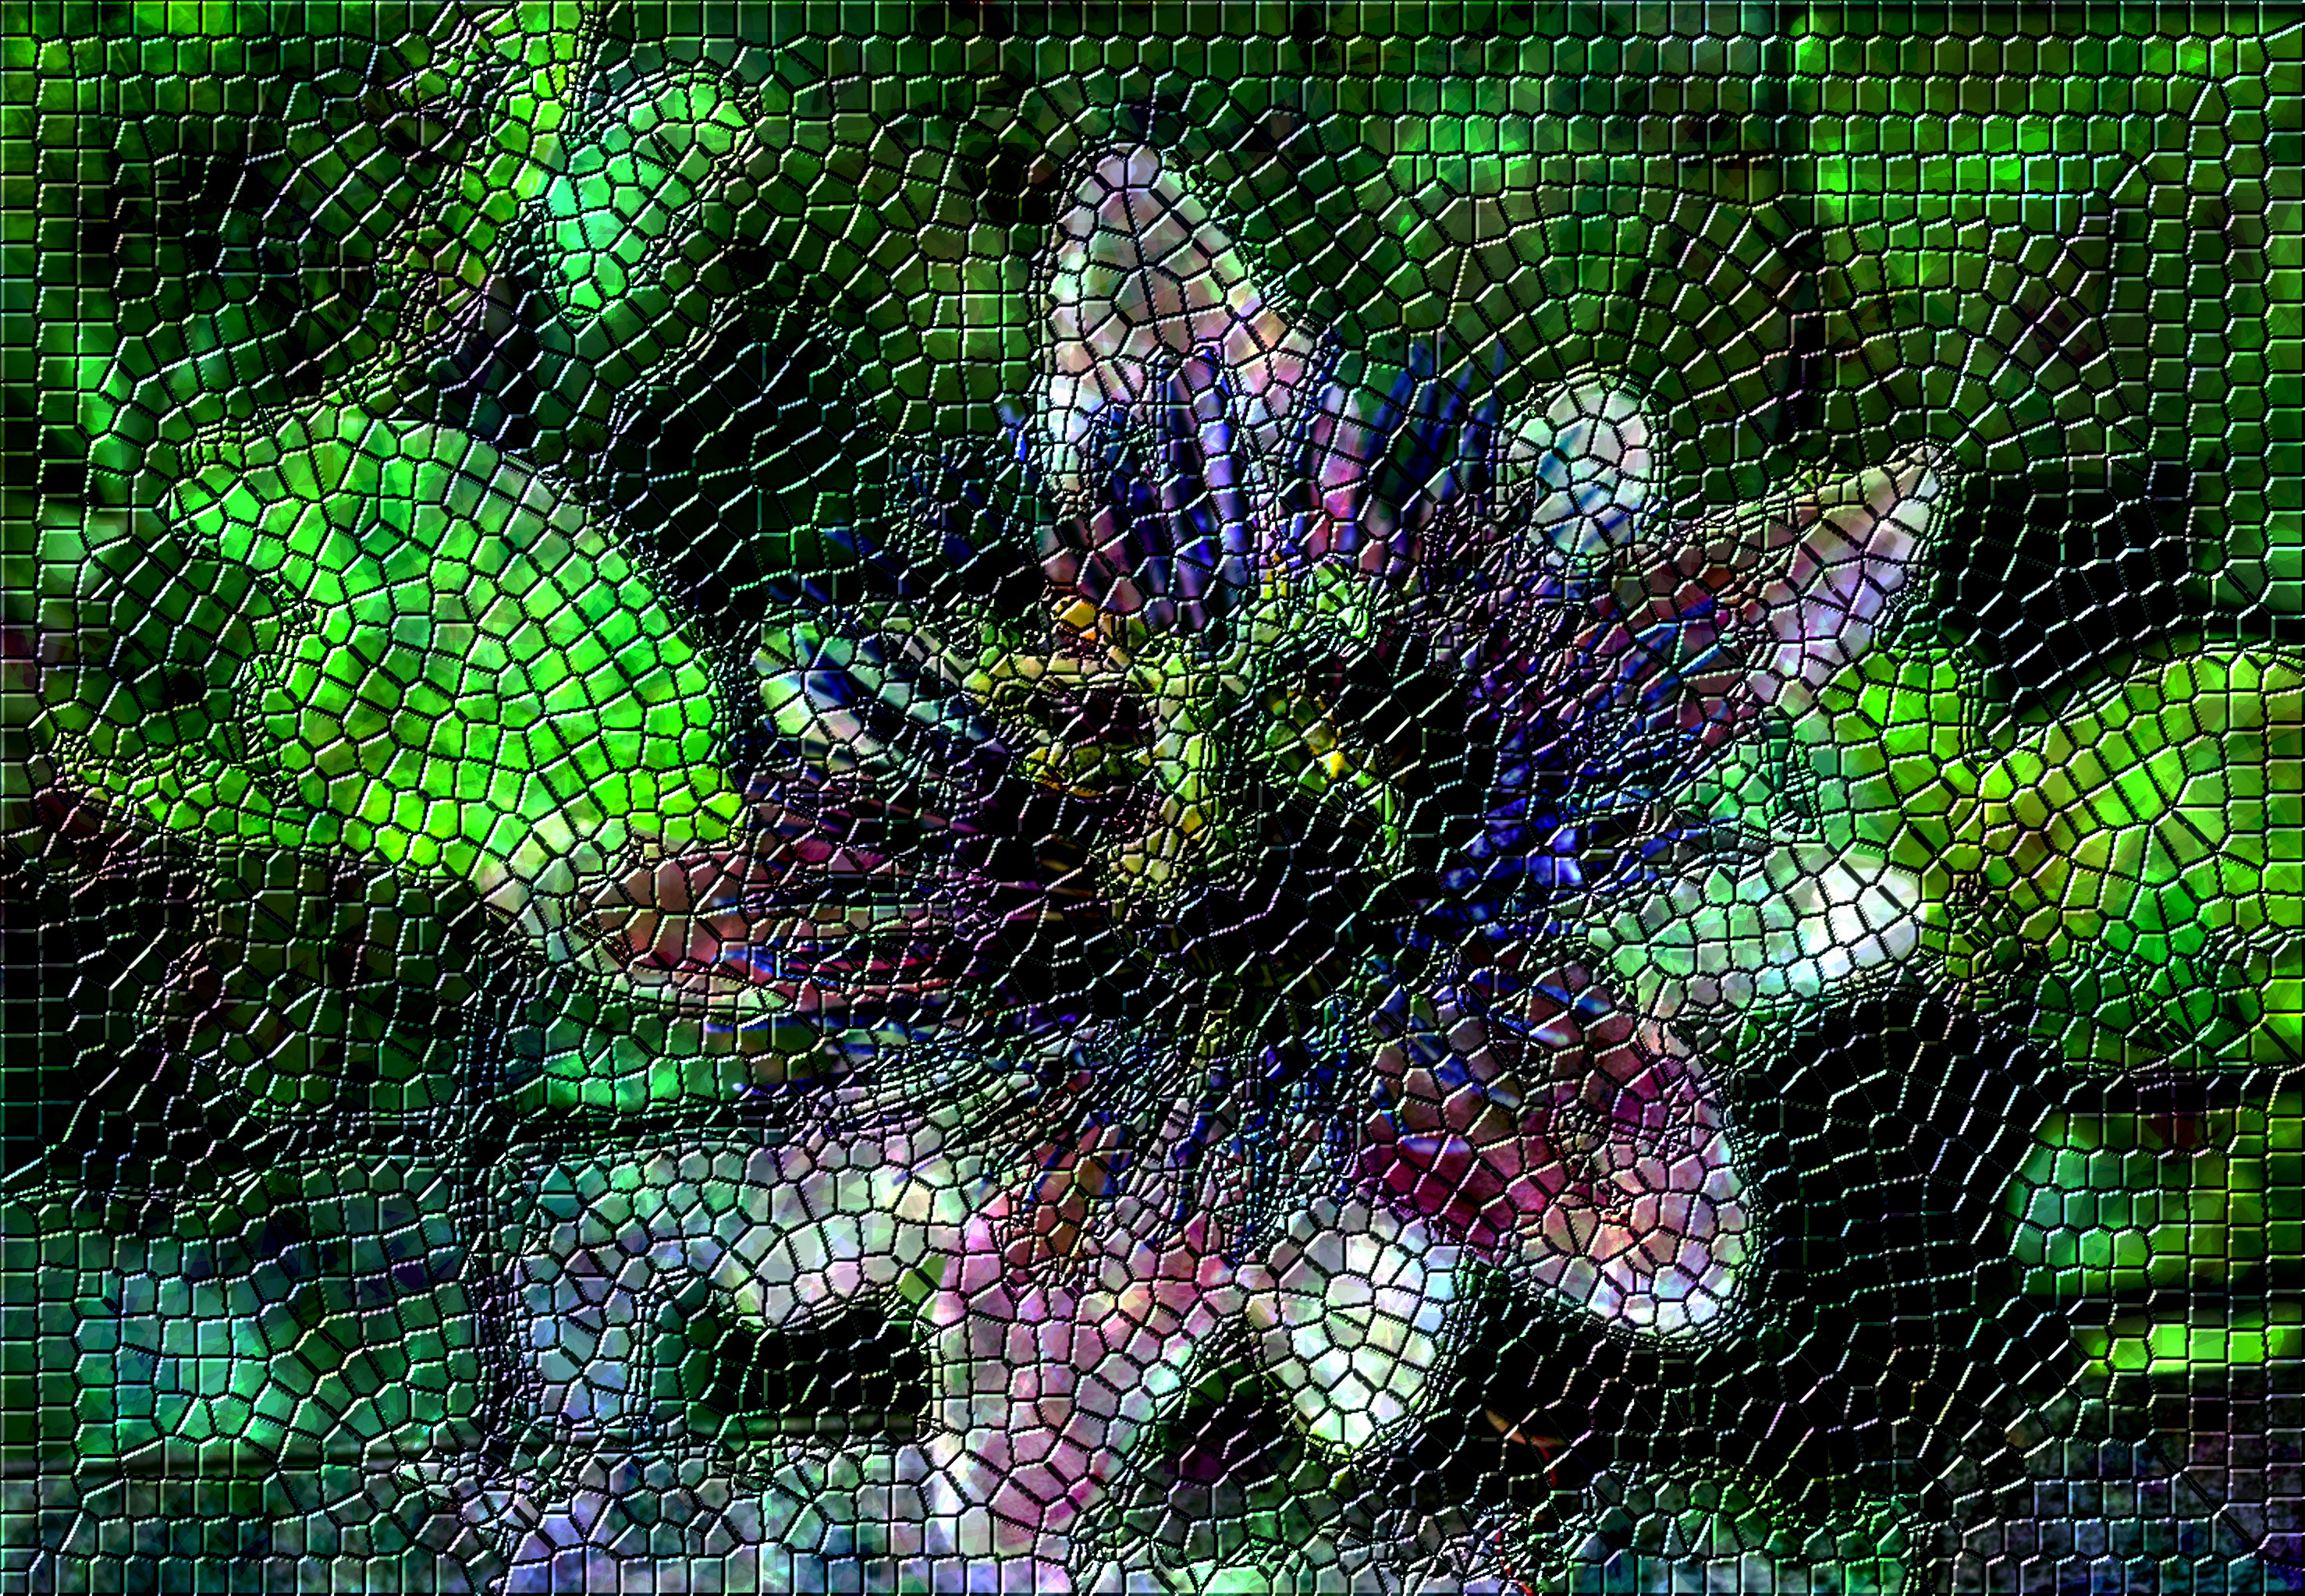 2020-04-11 08-56-12 close-up-photo-of-a-passion-flower-3123912 (1), as a Mosaic Roman style.jpg